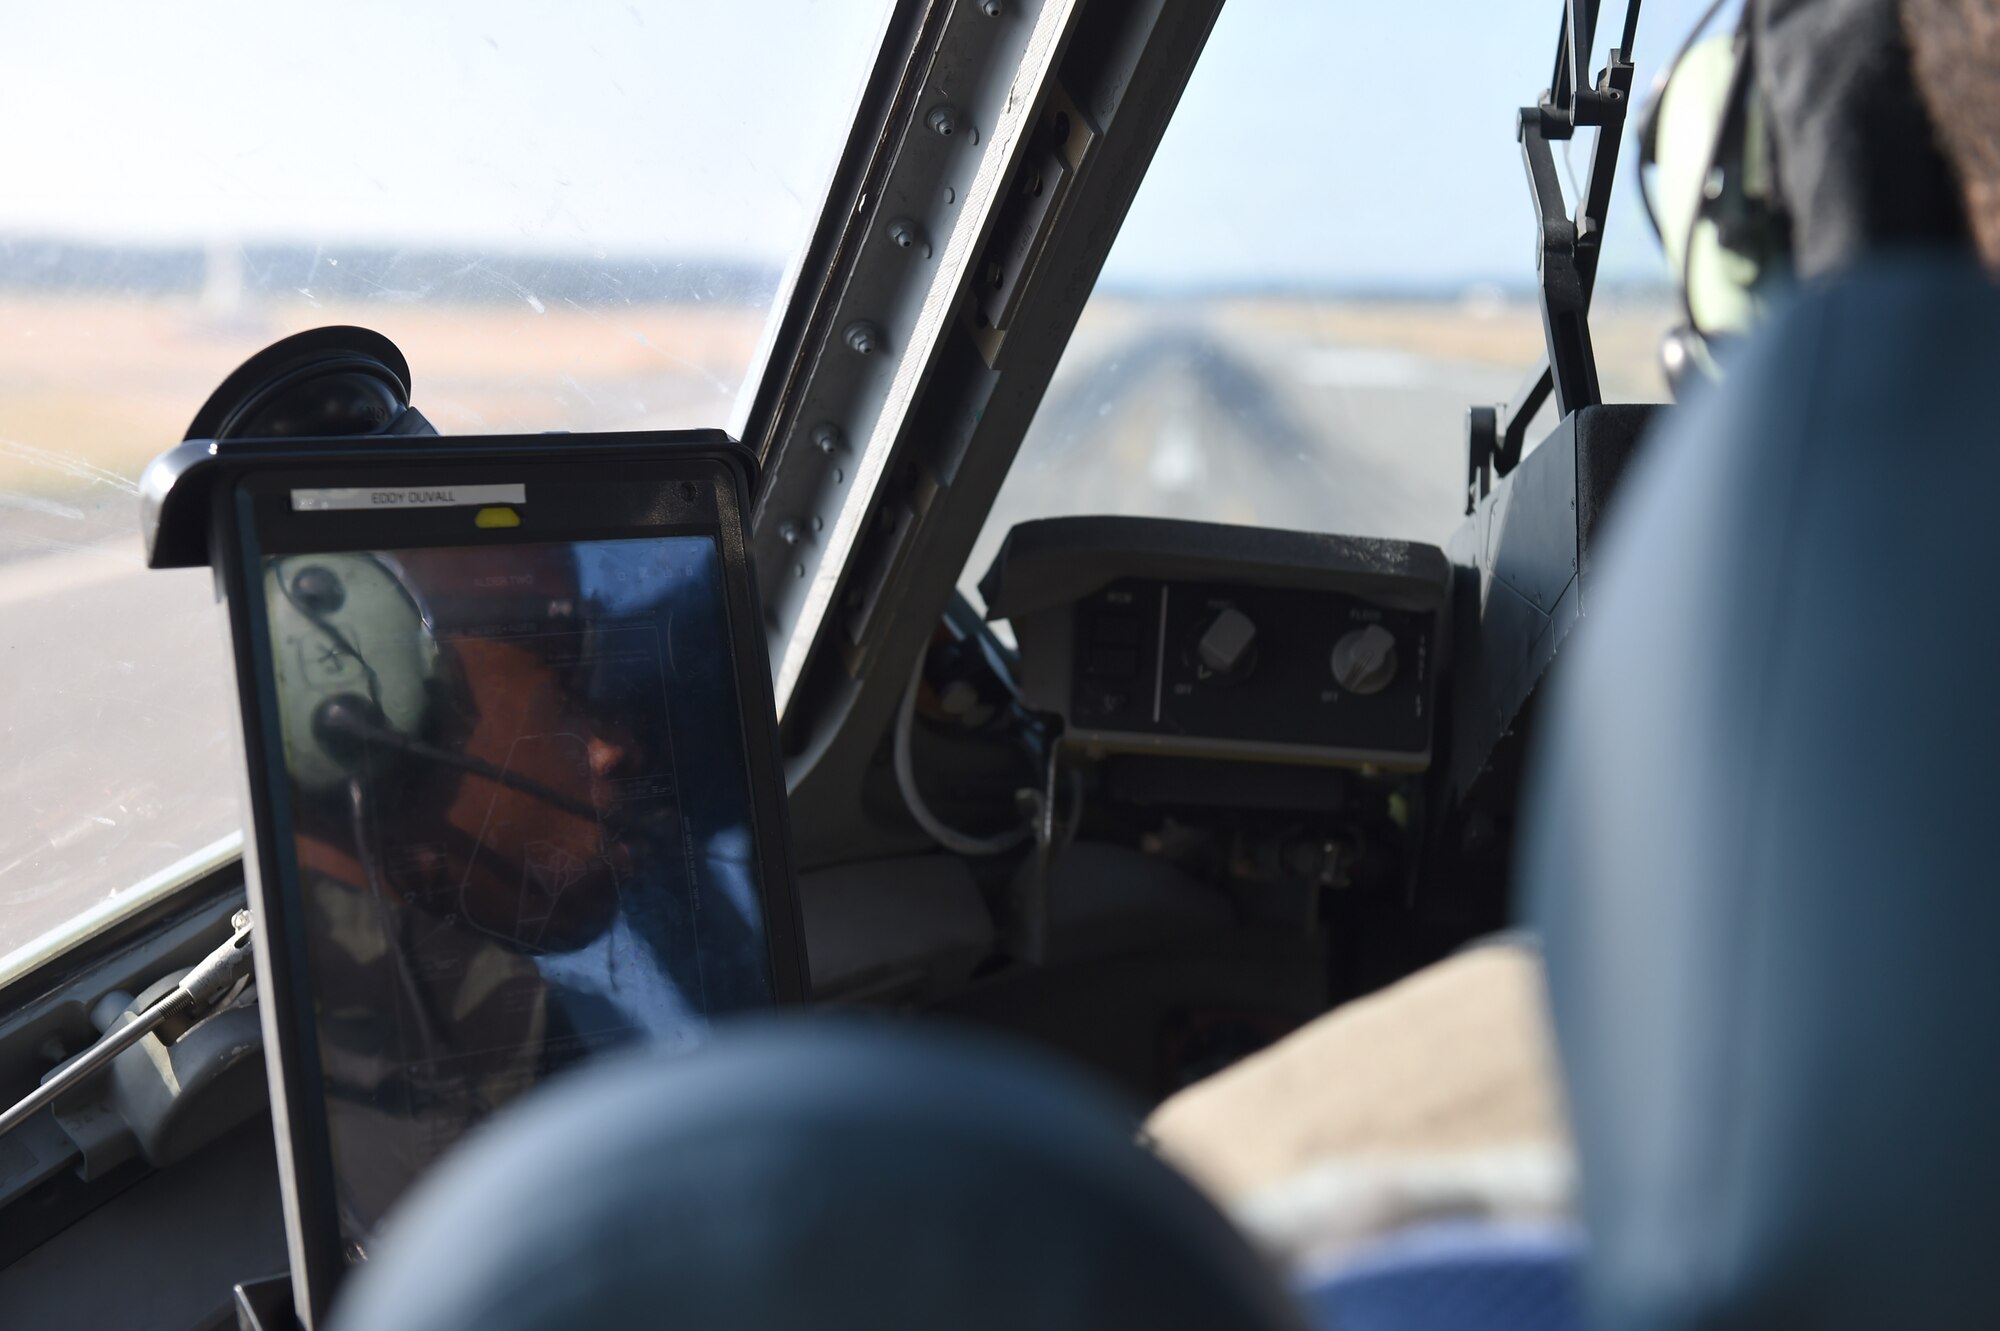 Capt. Edmond Duvall, 7th Airlift Squadron pilot, takes off from the McChord Field flight line on Joint Base Lewis-McChord, Wash., Aug. 5, 2020. Exercise Rainier War allowed for training opportunities for pilots to practice flight skills and log flight hours.  (U.S. Air Force photo by Airman 1st Class Mikayla Heineck)